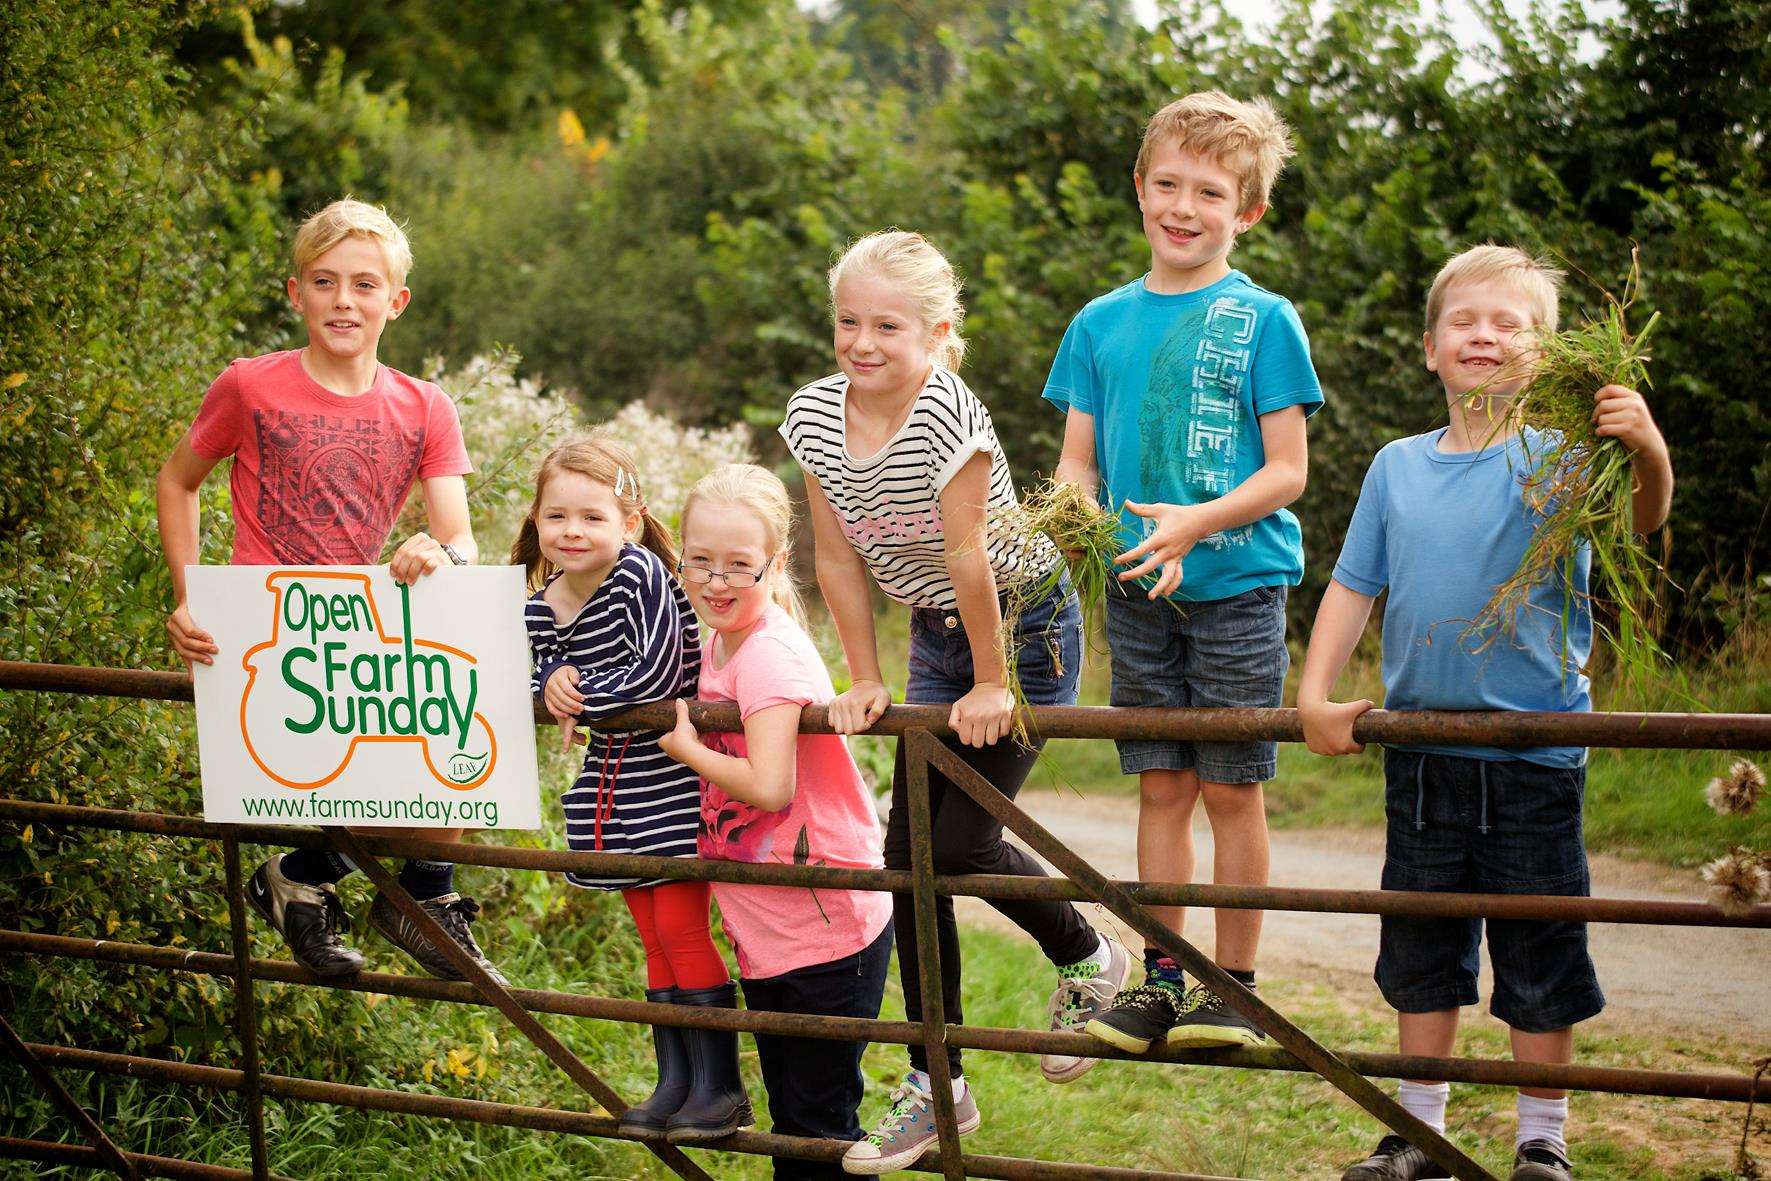 Open Farm Sunday is a chance to learn about farming